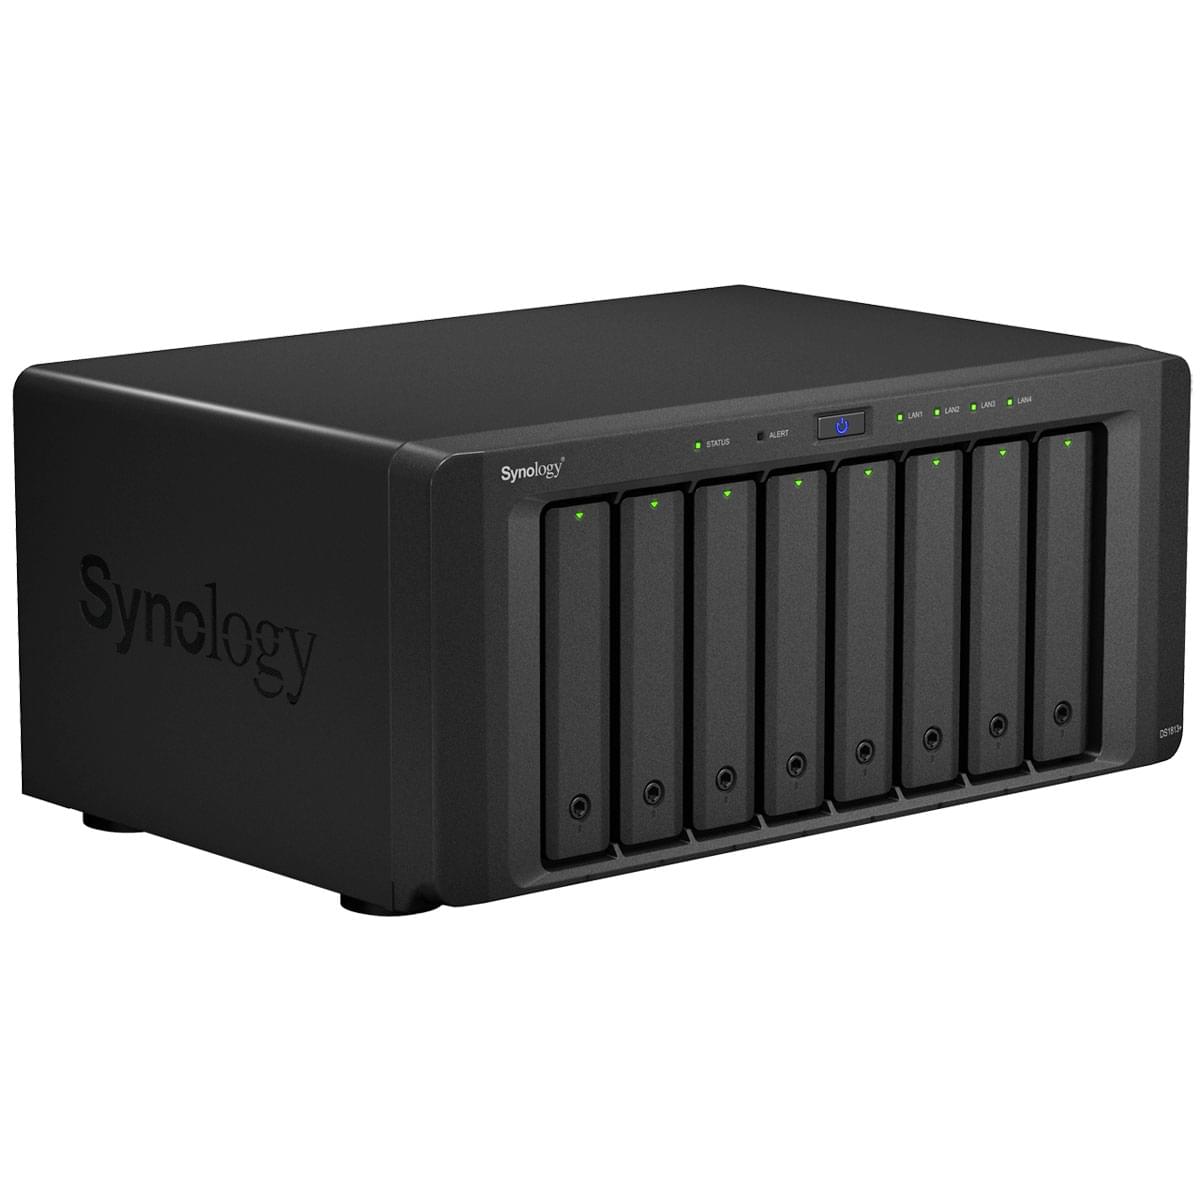 Serveur NAS Synology DS1813+ - 8 HDD